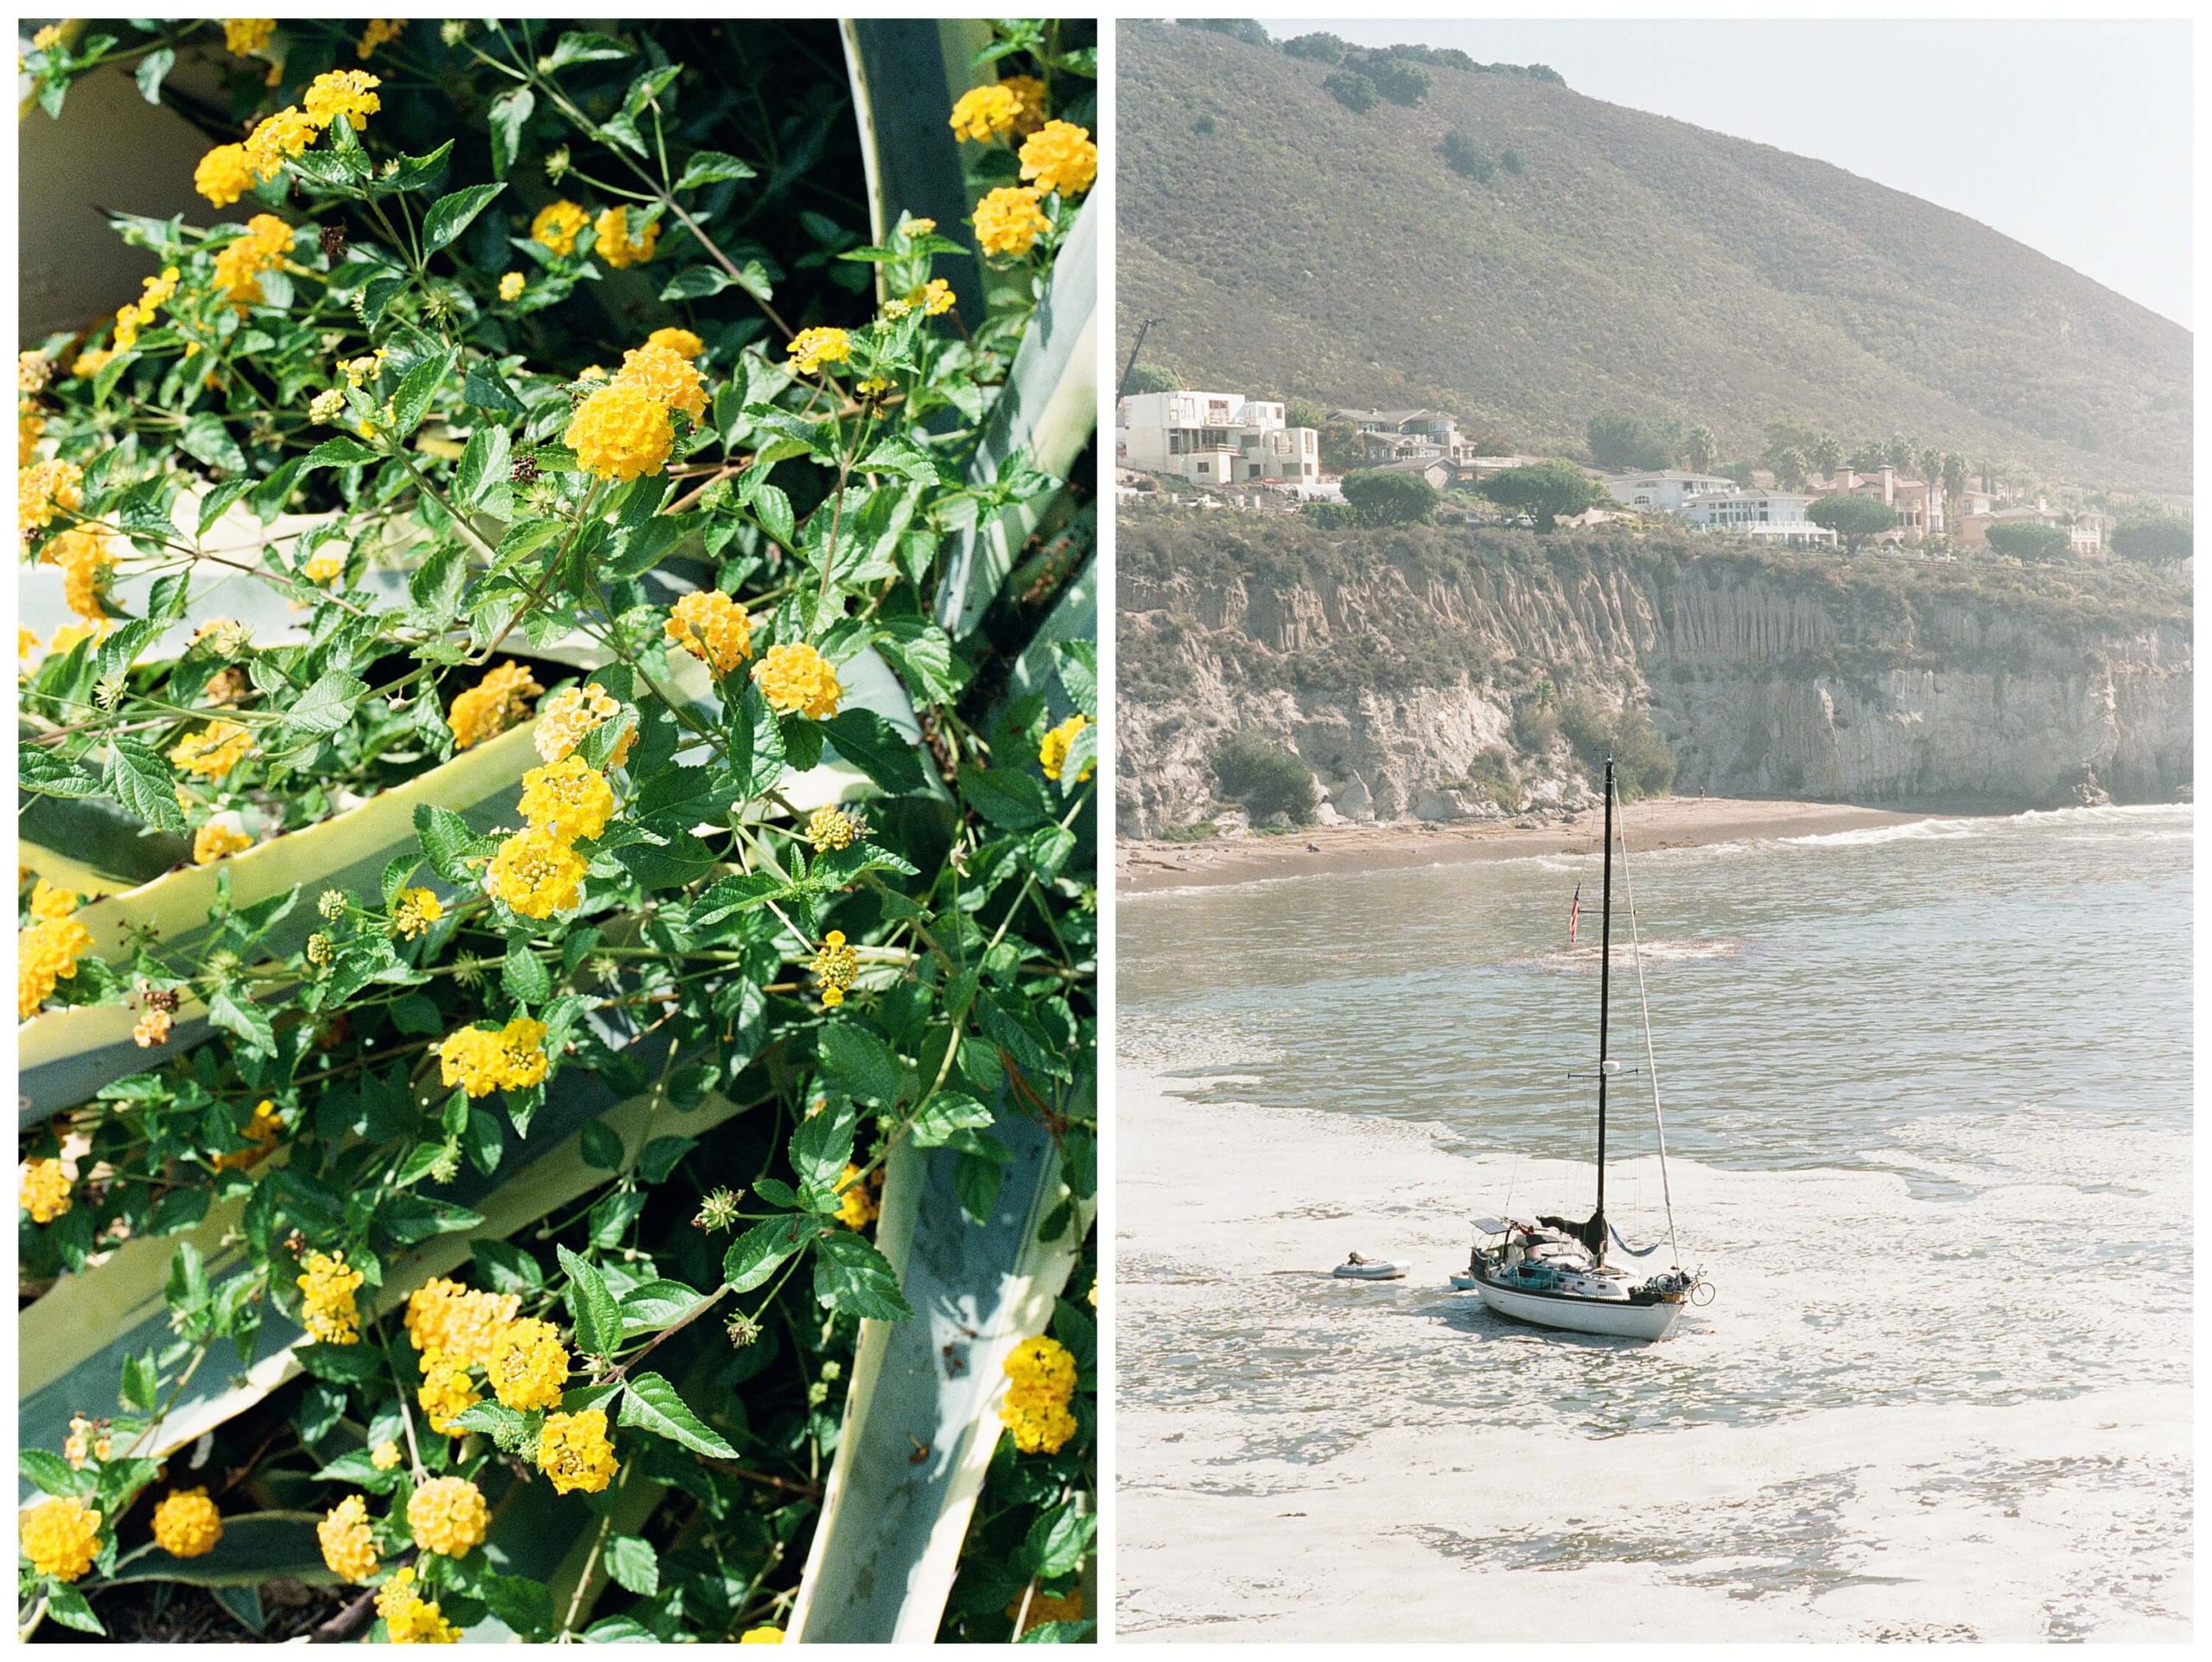 Left: Small, bouncy yellow flowers in full sun at Balboa Park. Right: A small boat bobs on the waves at Pirate's Cove in San Luis Obispo under the glaring sun.